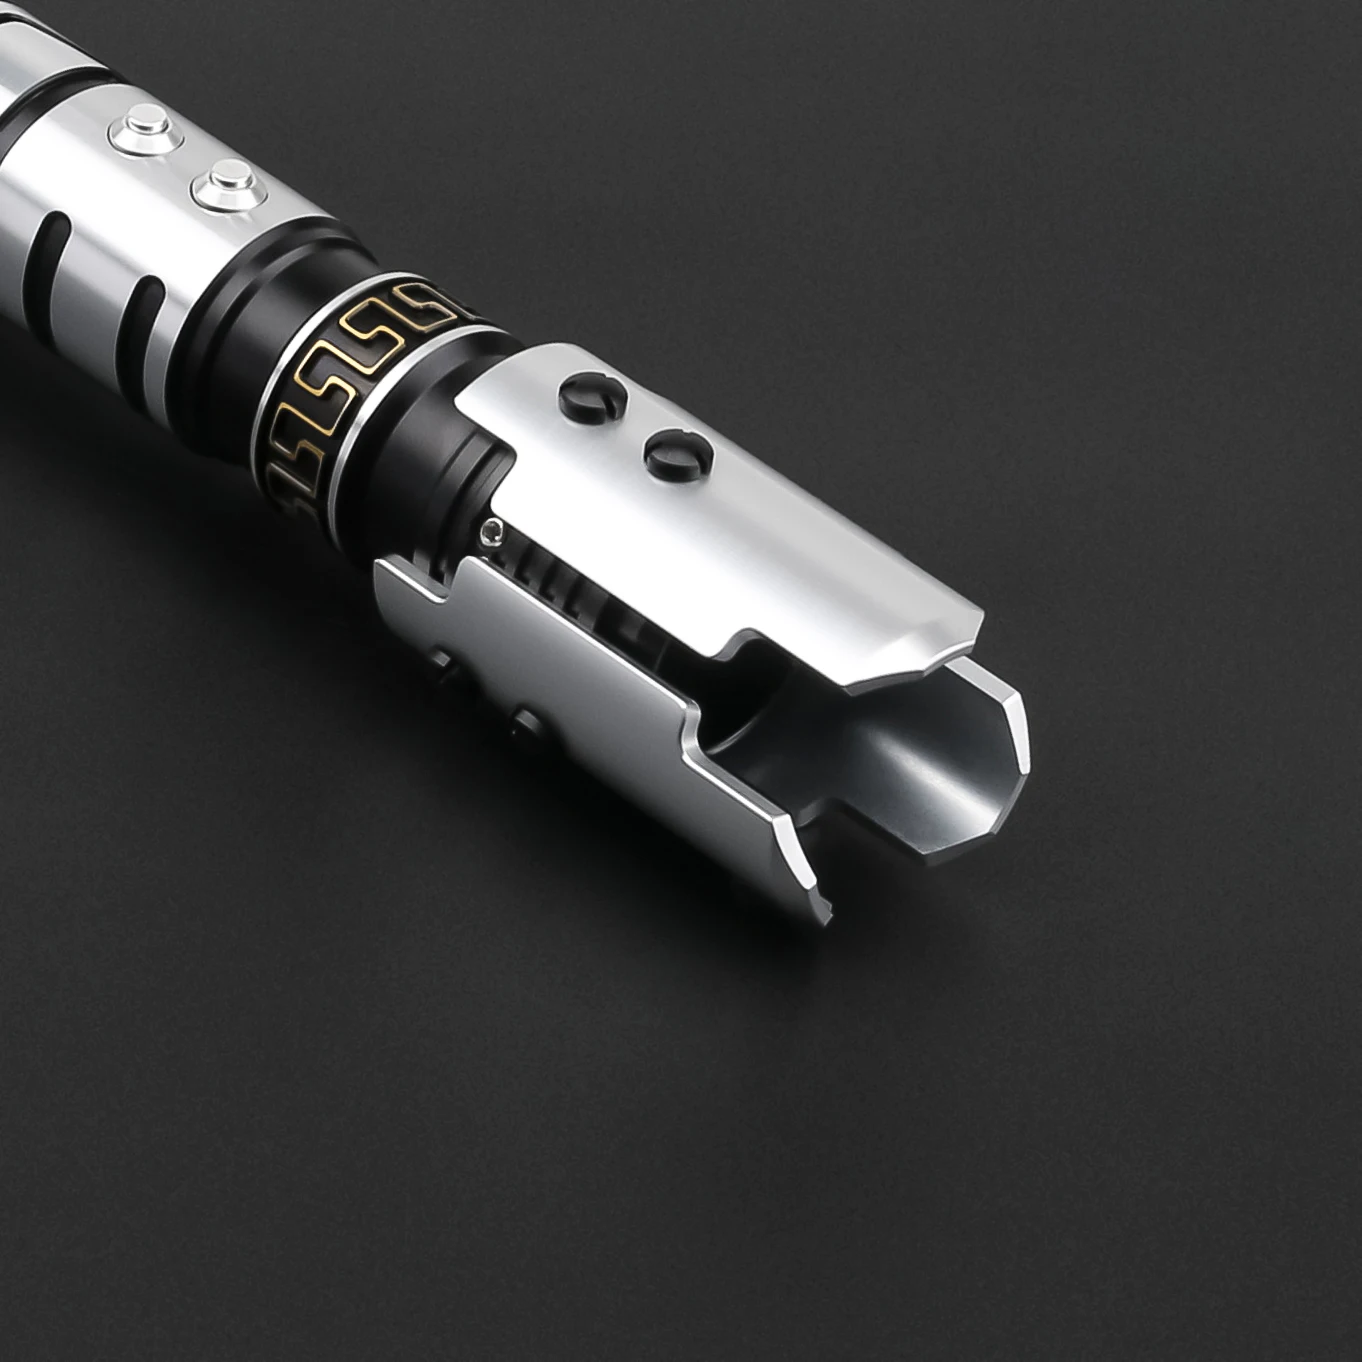 TXQSABER Neo Pixel Lightsaber Judger SNV4 Proffie Smooth Swing Metal Handle Force Heavy Dueling Cosplay Jedi Toys